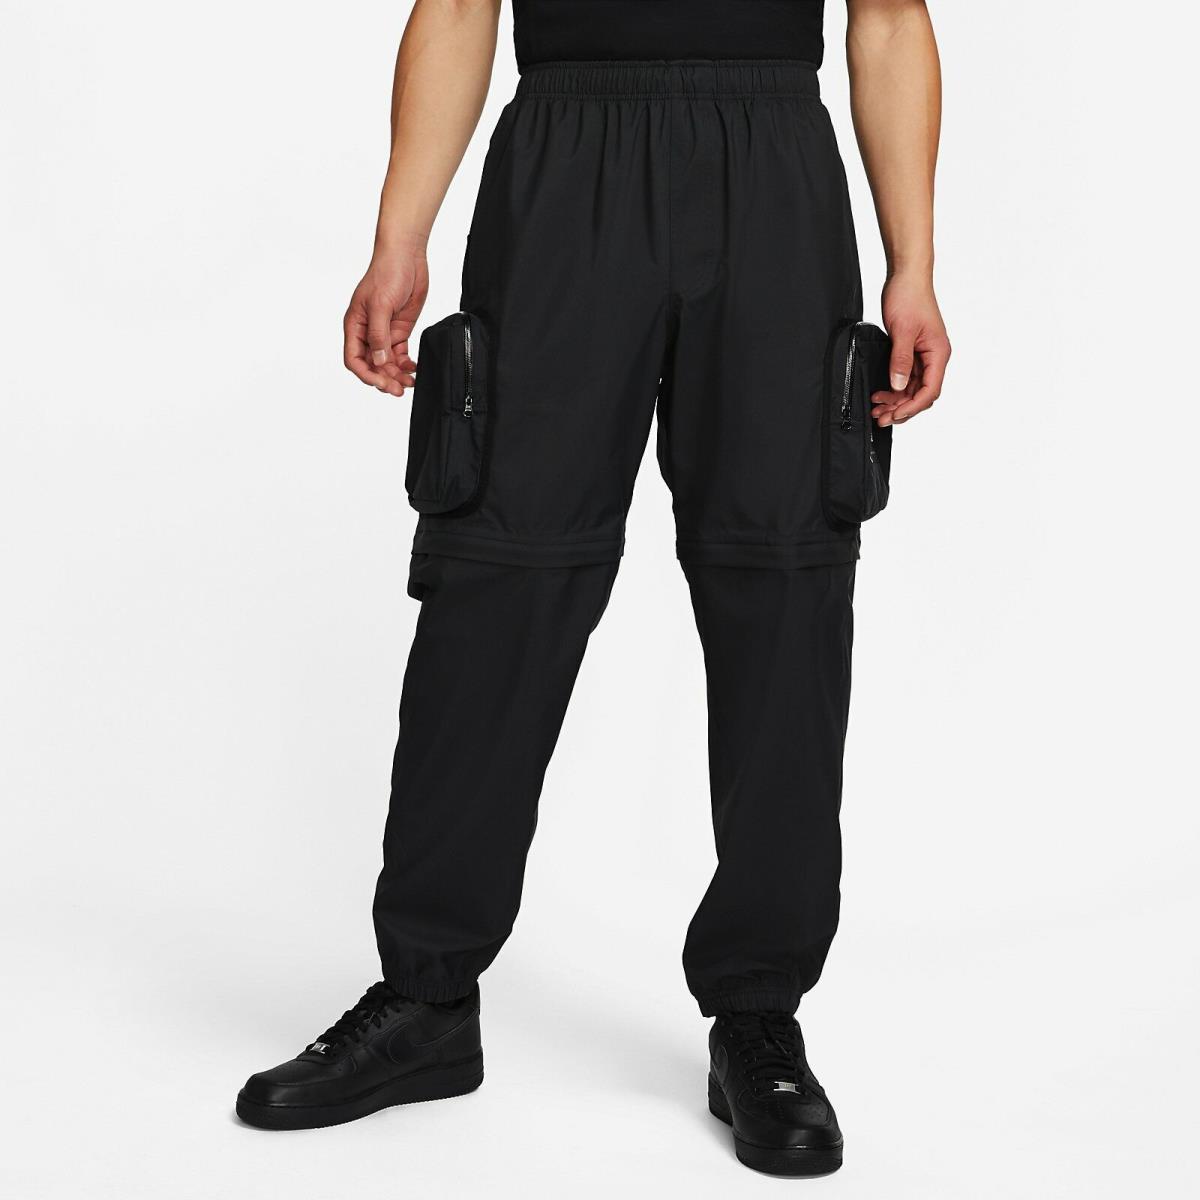 Nike X Undercover Cargo Track Pants Convertible Shorts 2 in 1 Black XL